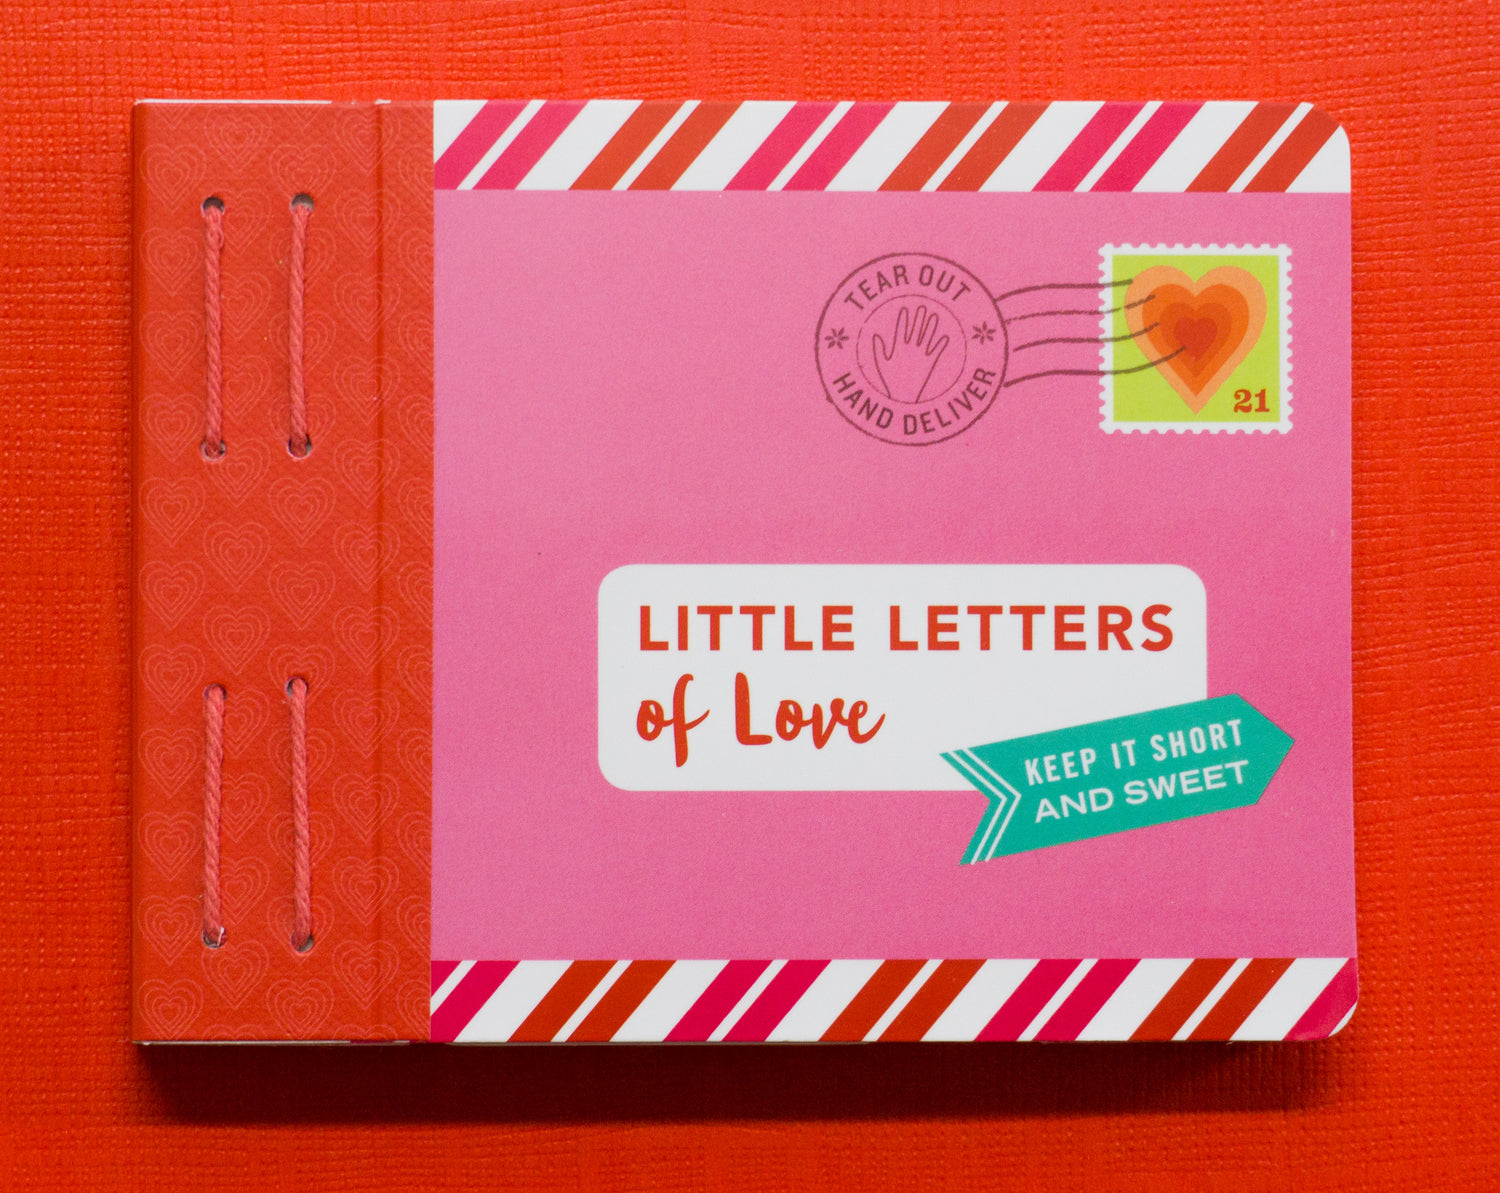 Letters of Love - The Postal Museum